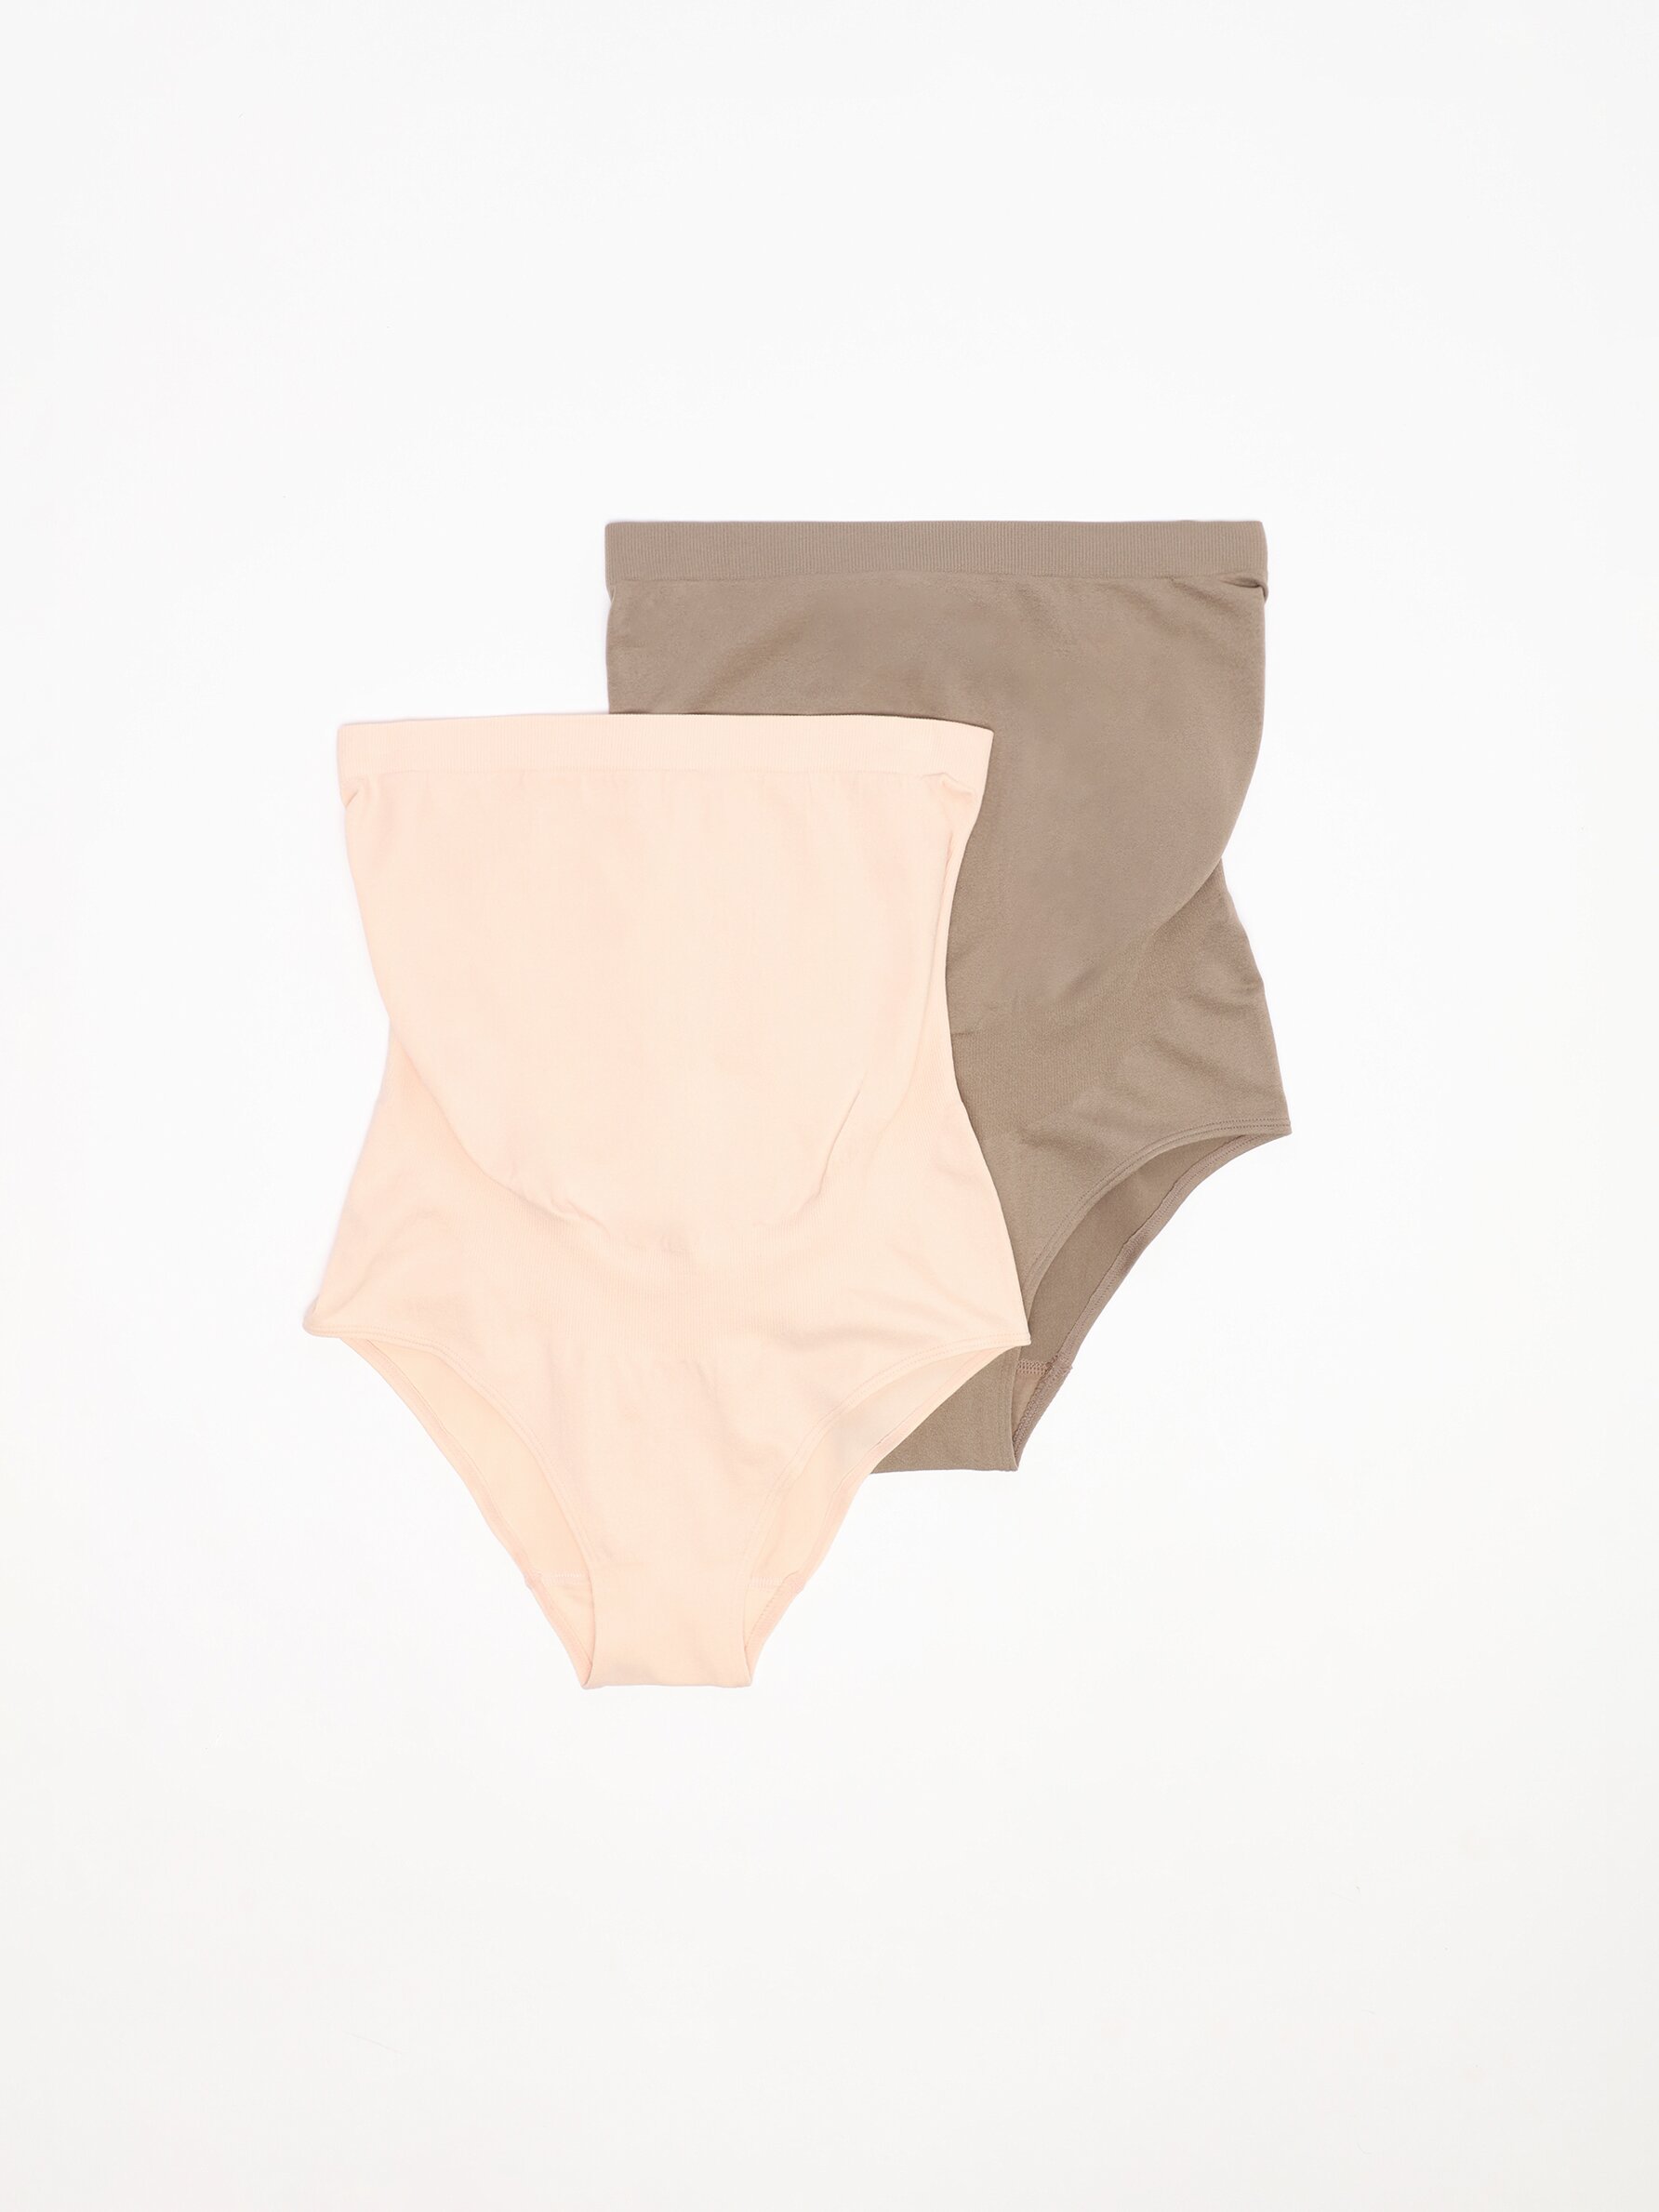 Pack of 2 high-waist maternity briefs - Underwear - Maternity - CLOTHING -  Woman 